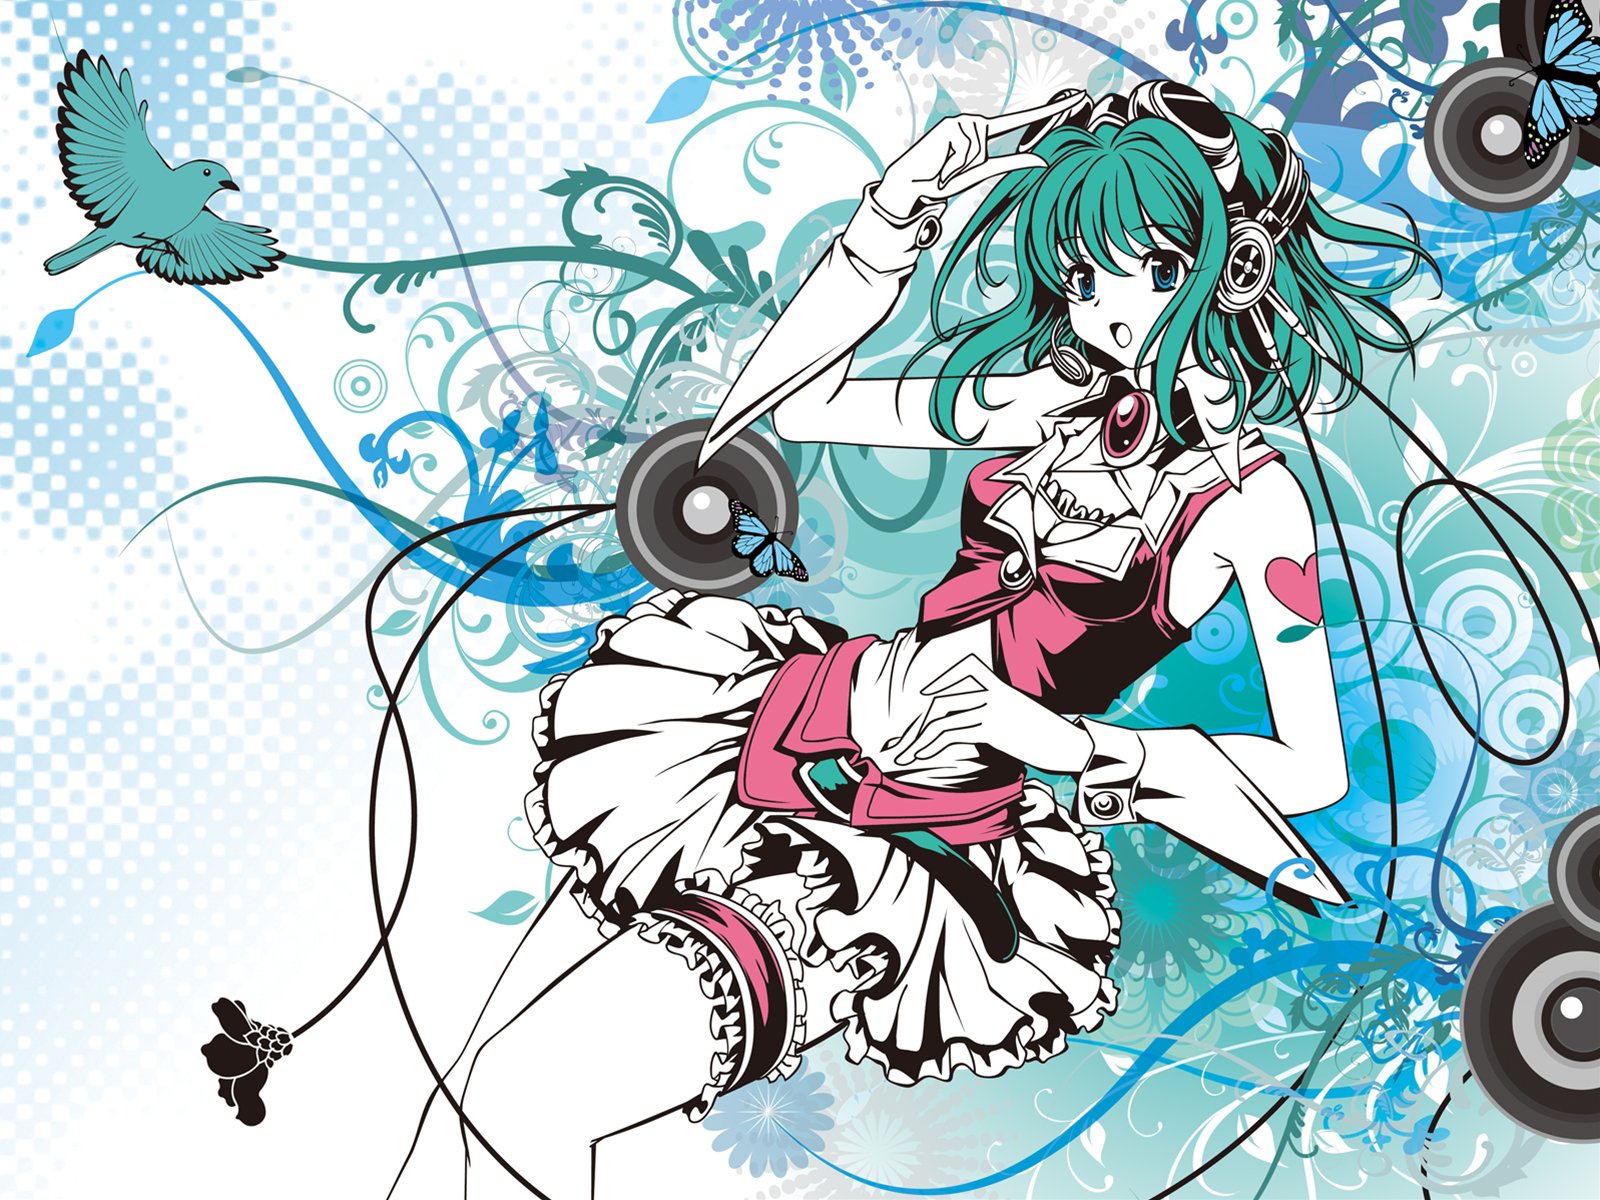 Gumi 壁紙no 13 15 Vocaloid ボーカロイド 壁紙家